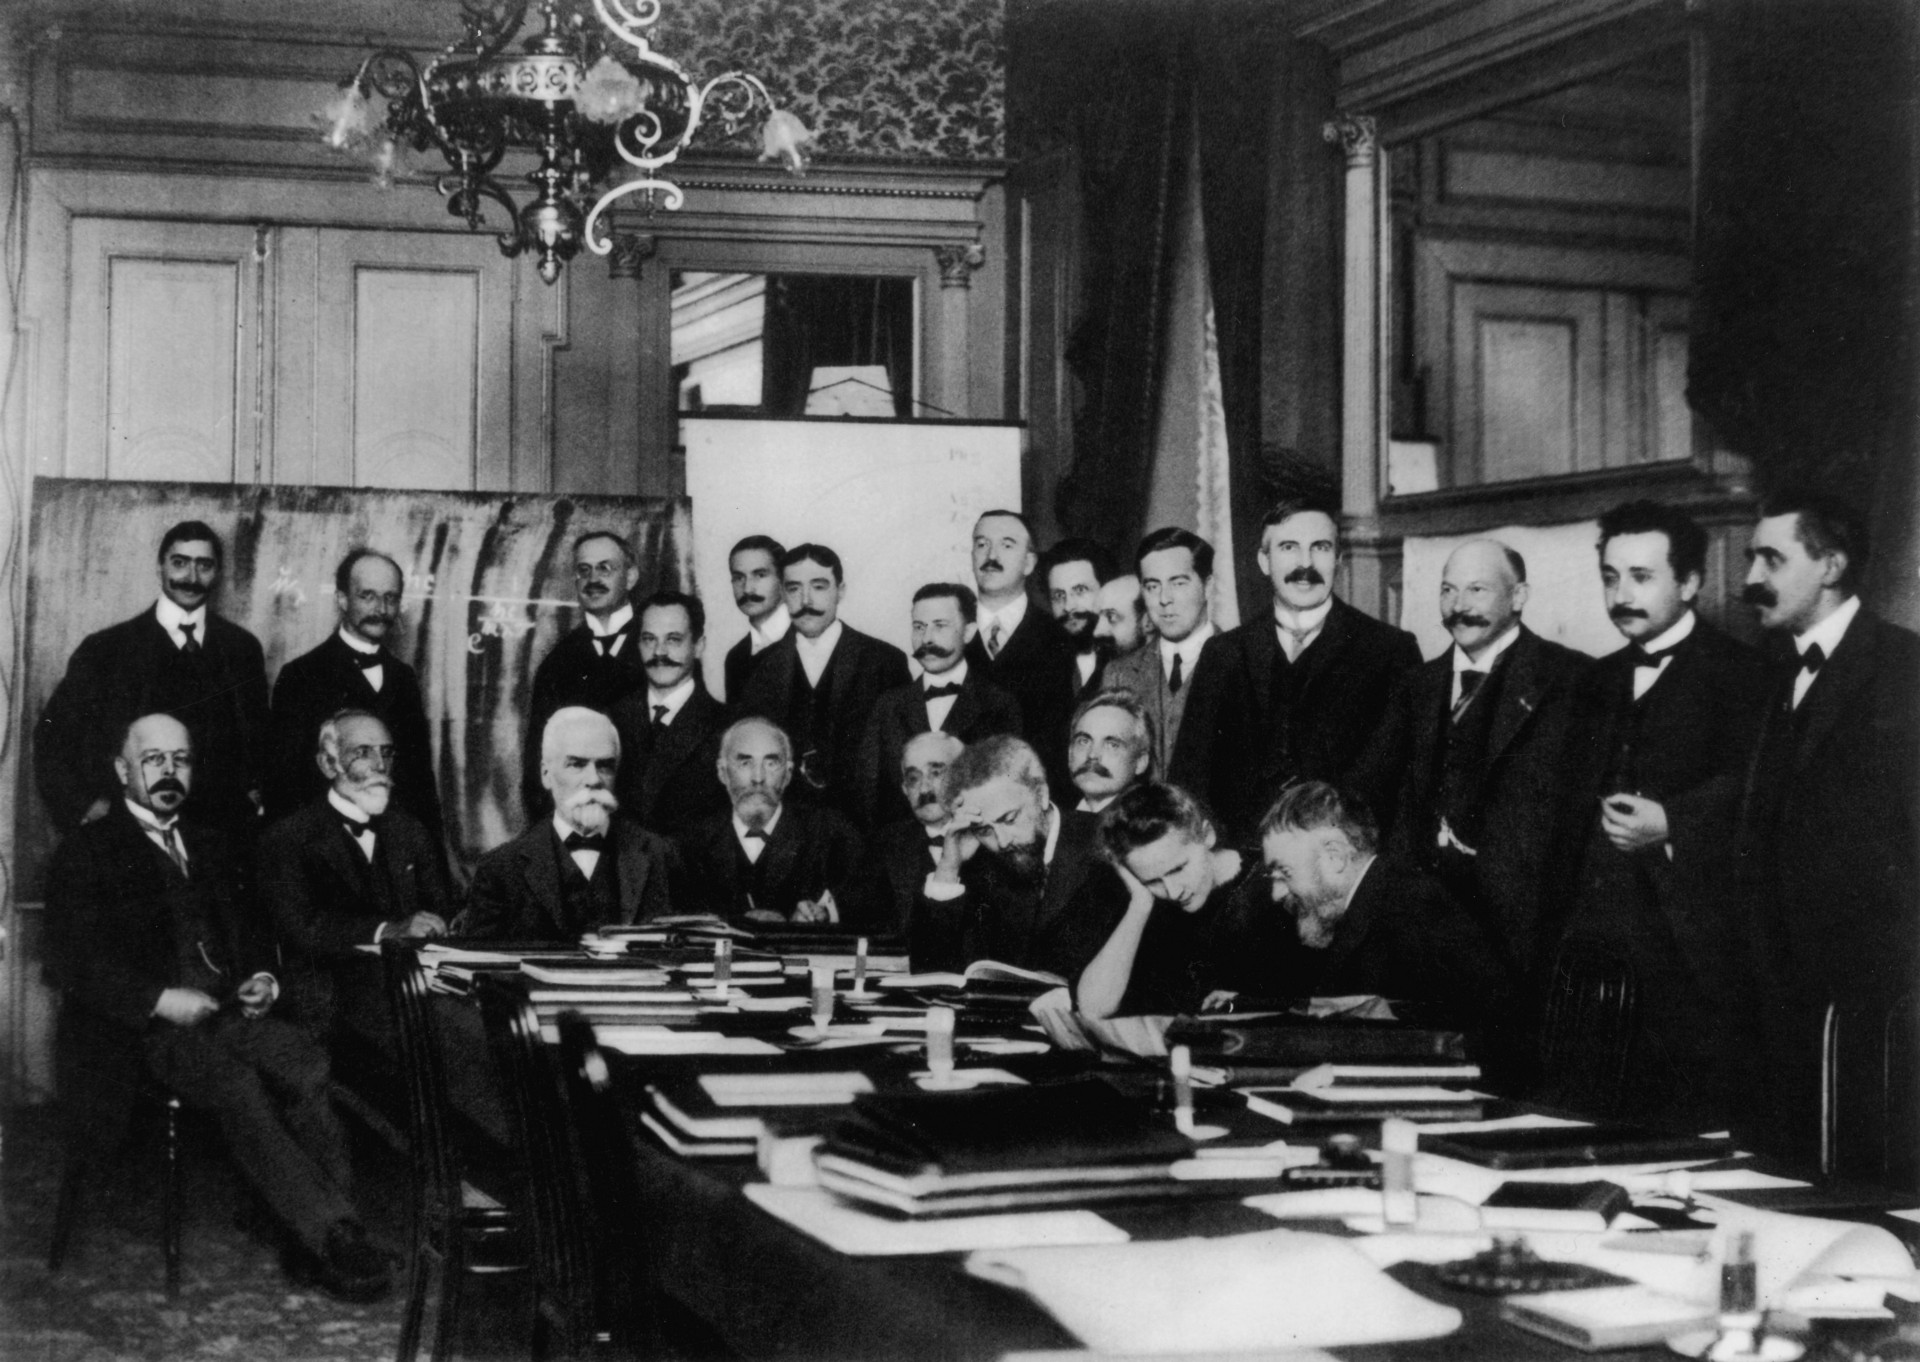 At First Solvay Conference (1911), Marie Curie (seated, second from right) confers with Henri Poincaré; standing, fourth from right, is Rutherford; second from right, Einstein; far right, Paul Langevin